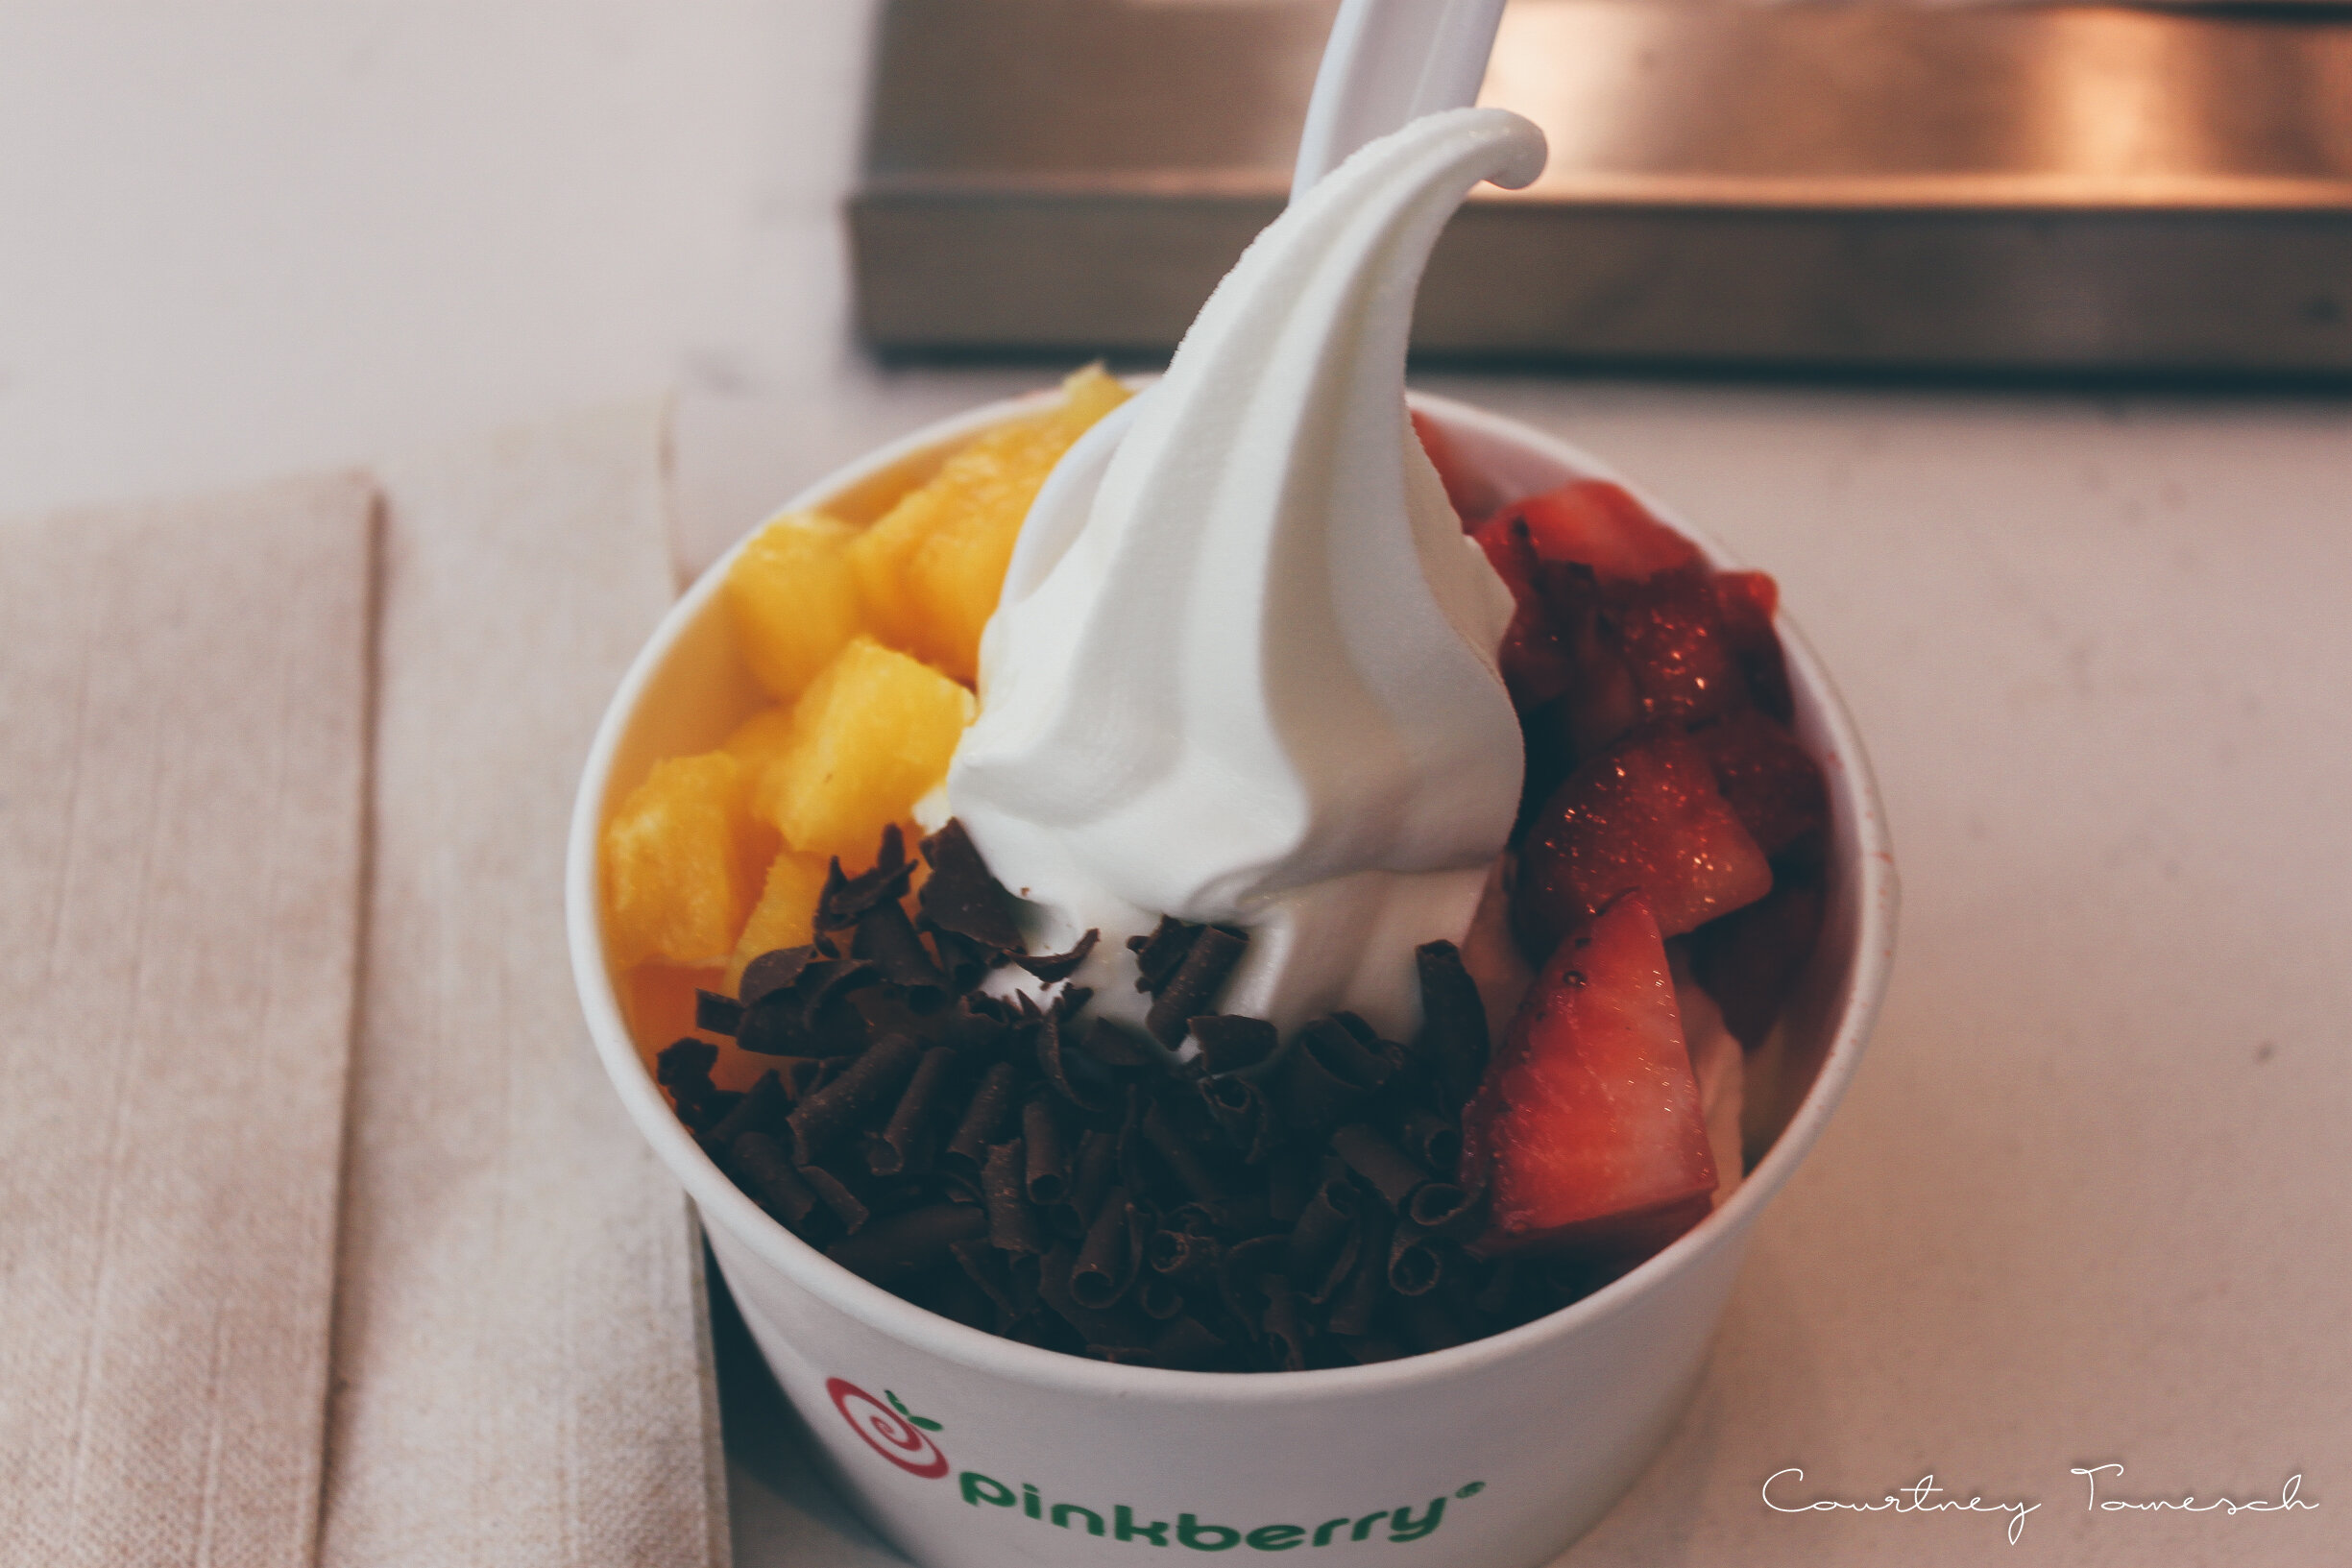   Pinkberry after the game! YUMMM!!   Original with pineapples, strawberries and chocolate shavings! 